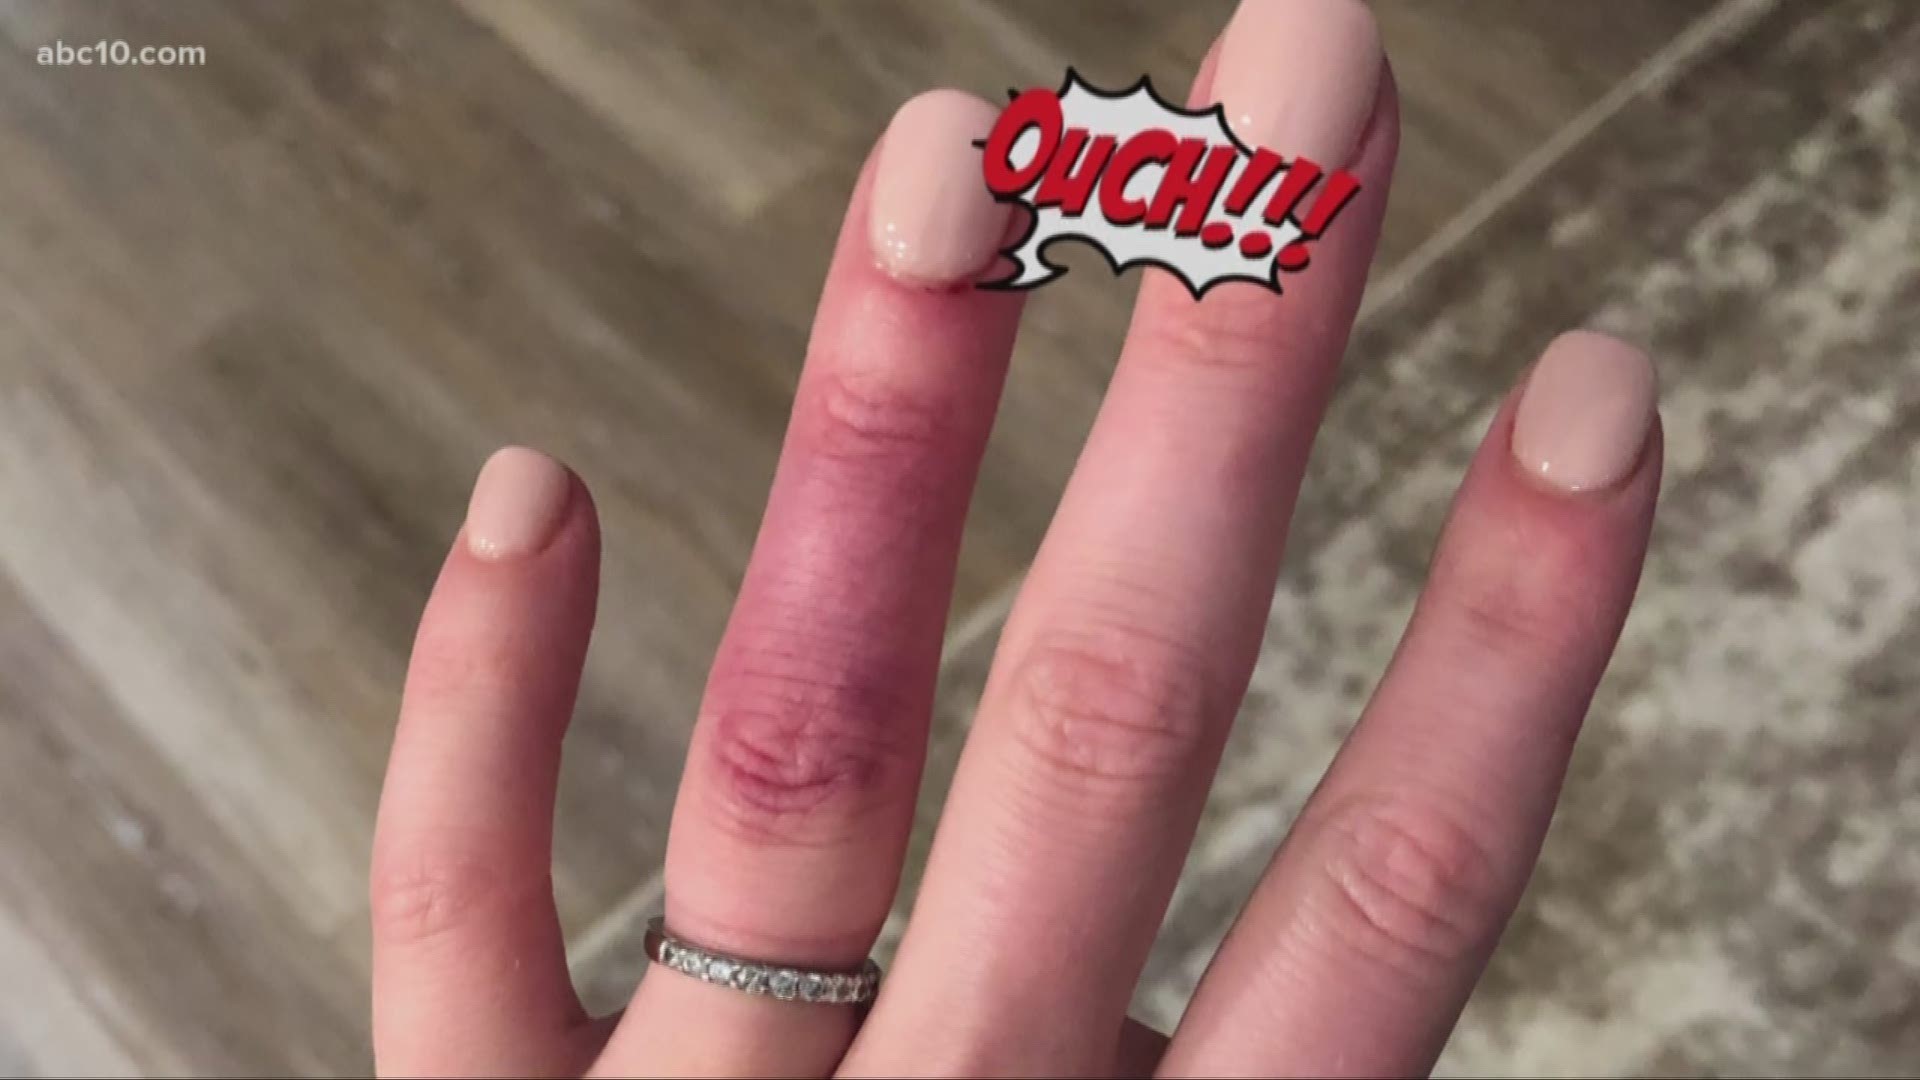 Infection after nail salon visit? It's common and happened to ABC10's  Madison Meyer 